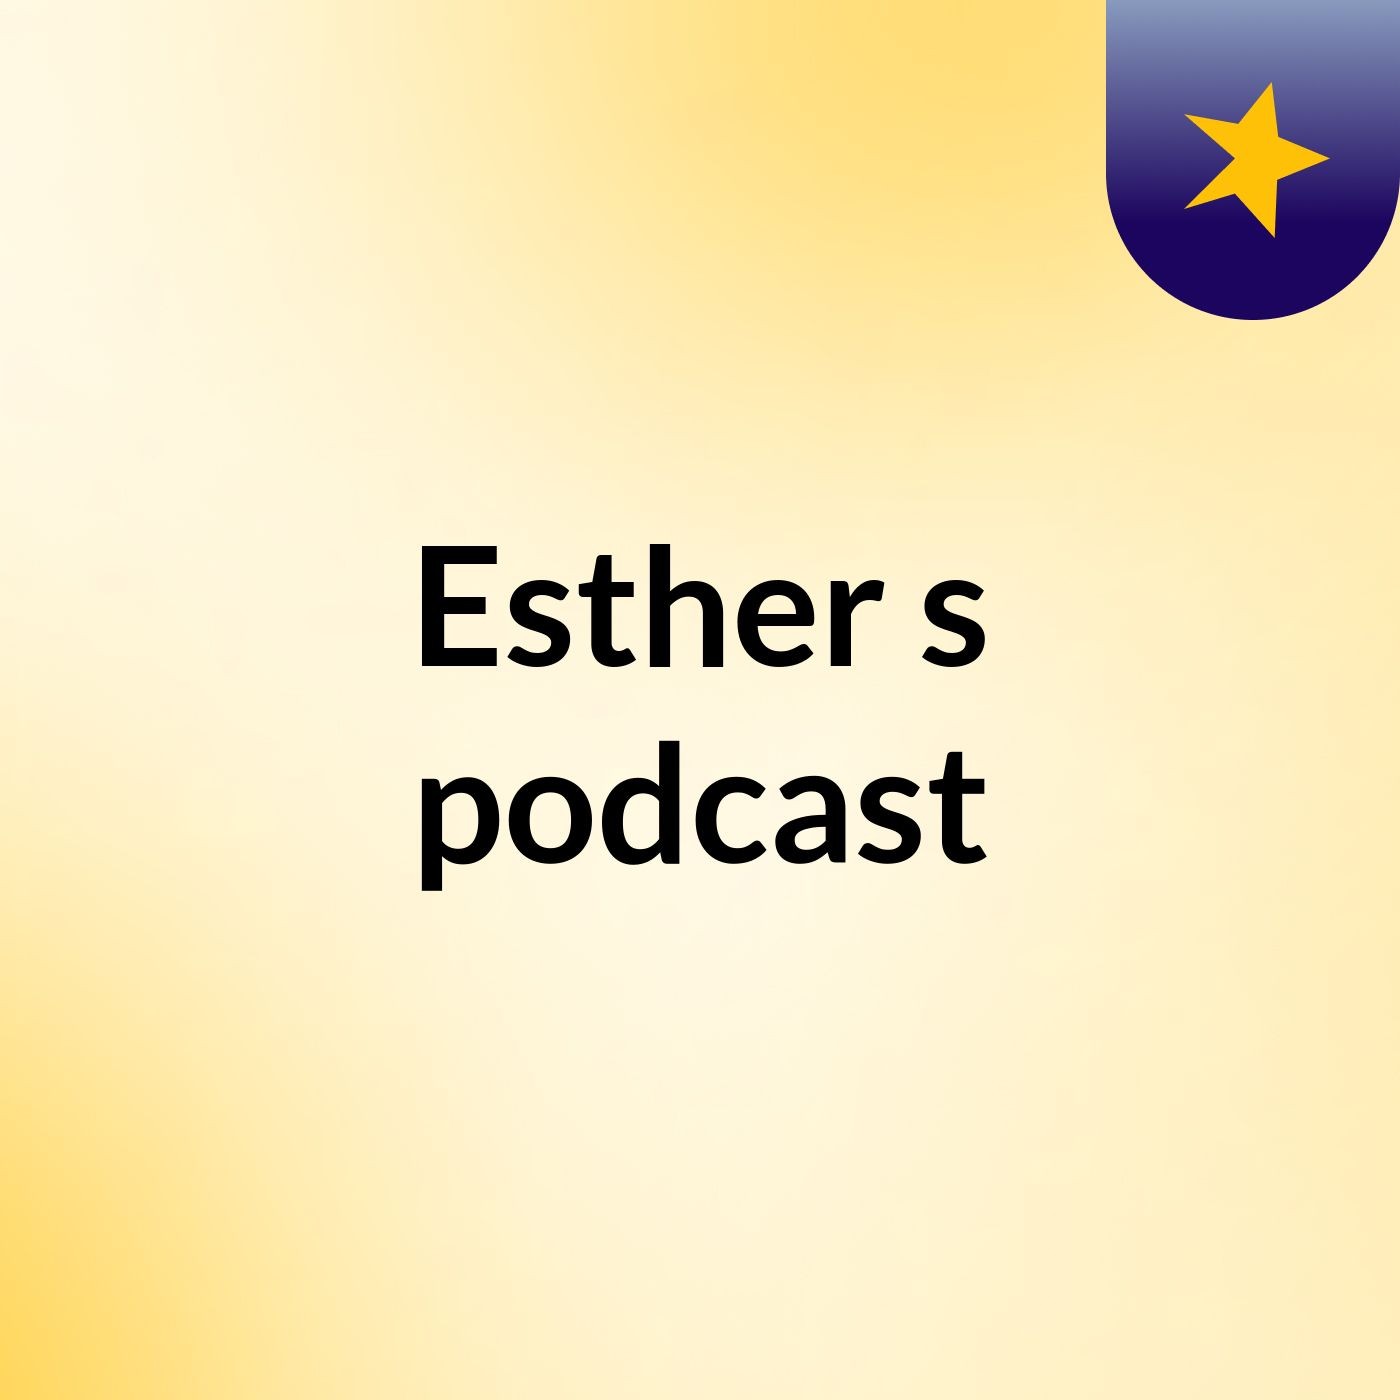 Episode 2 - Esther's podcast